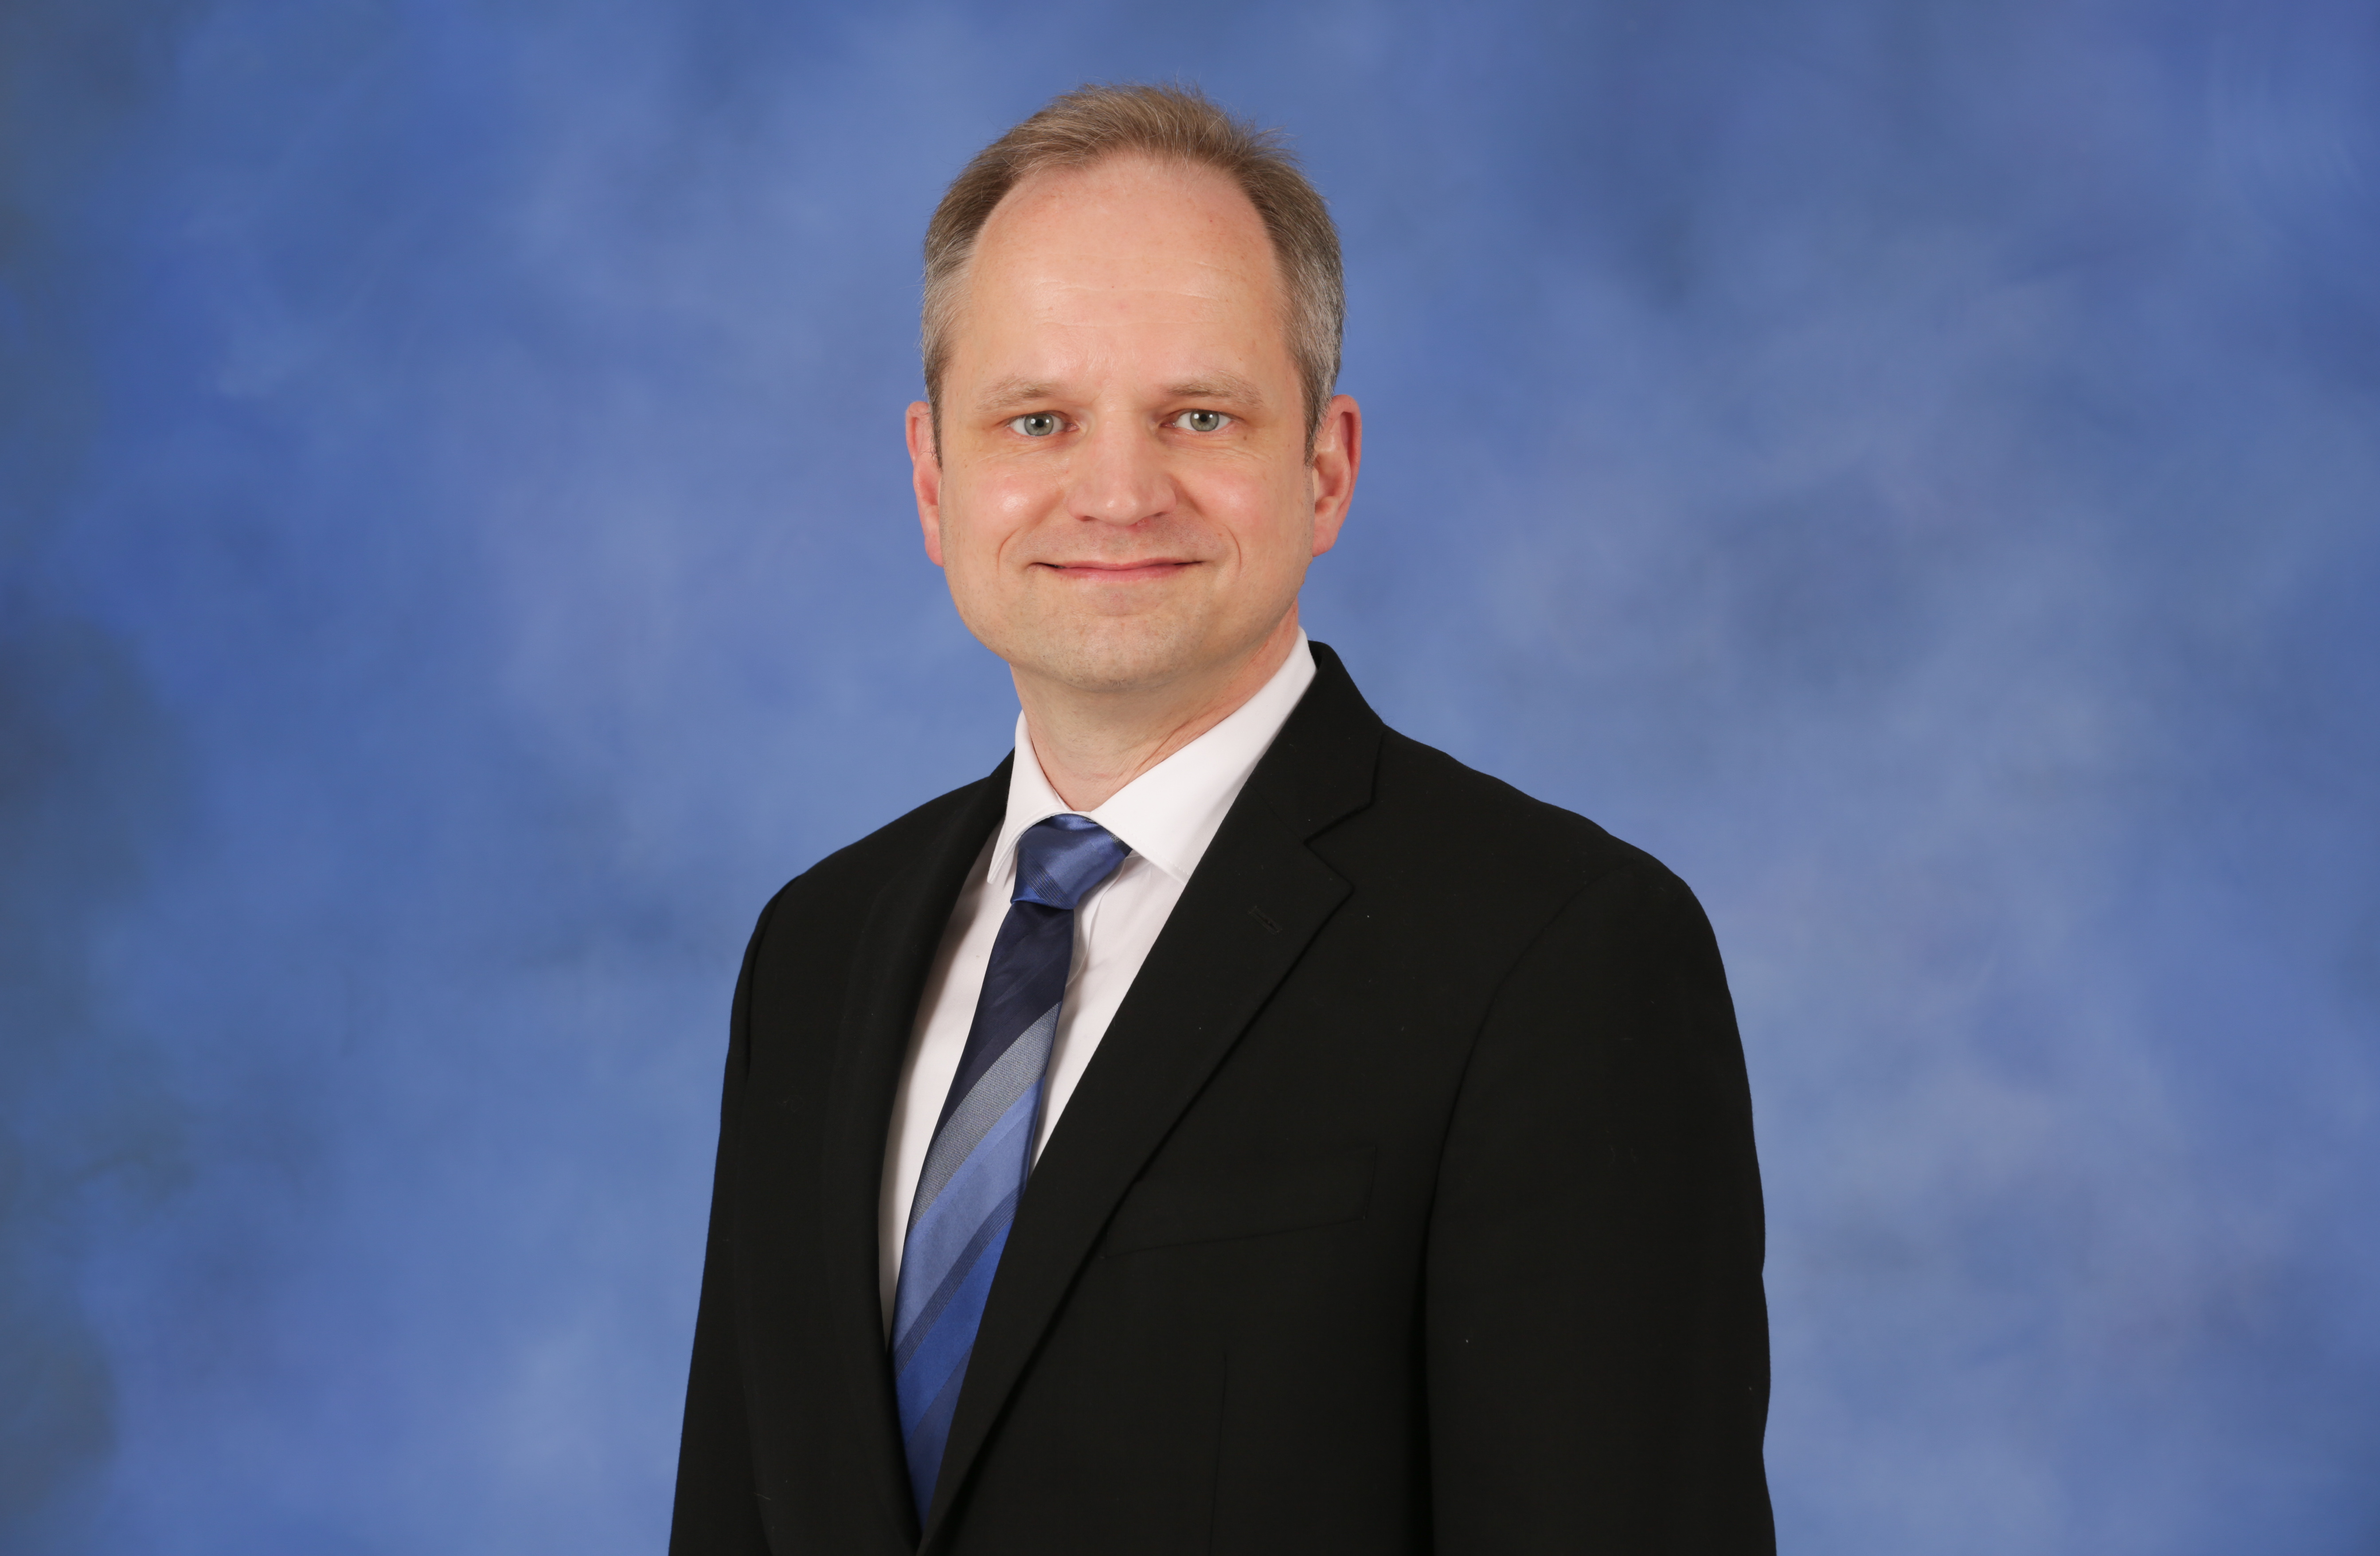 Dr. Rainer Steinwandt Joins CoS as New Dean